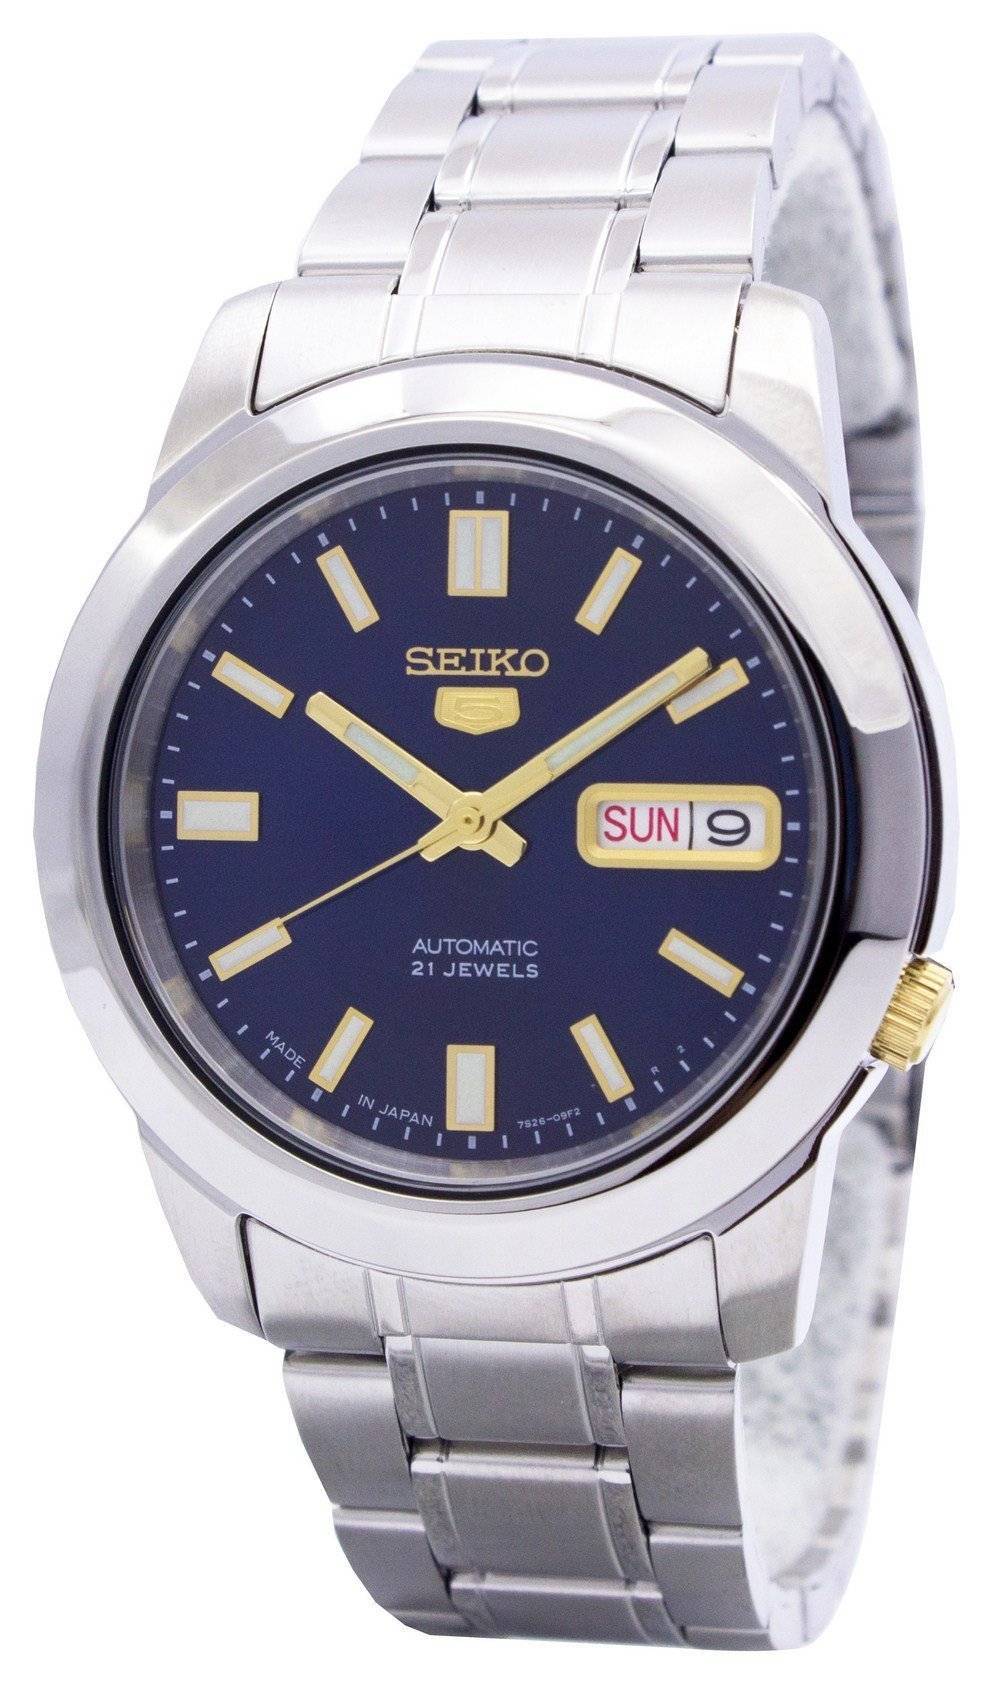 Seiko Automatic 21 Jewels Water Resistant | tunersread.com